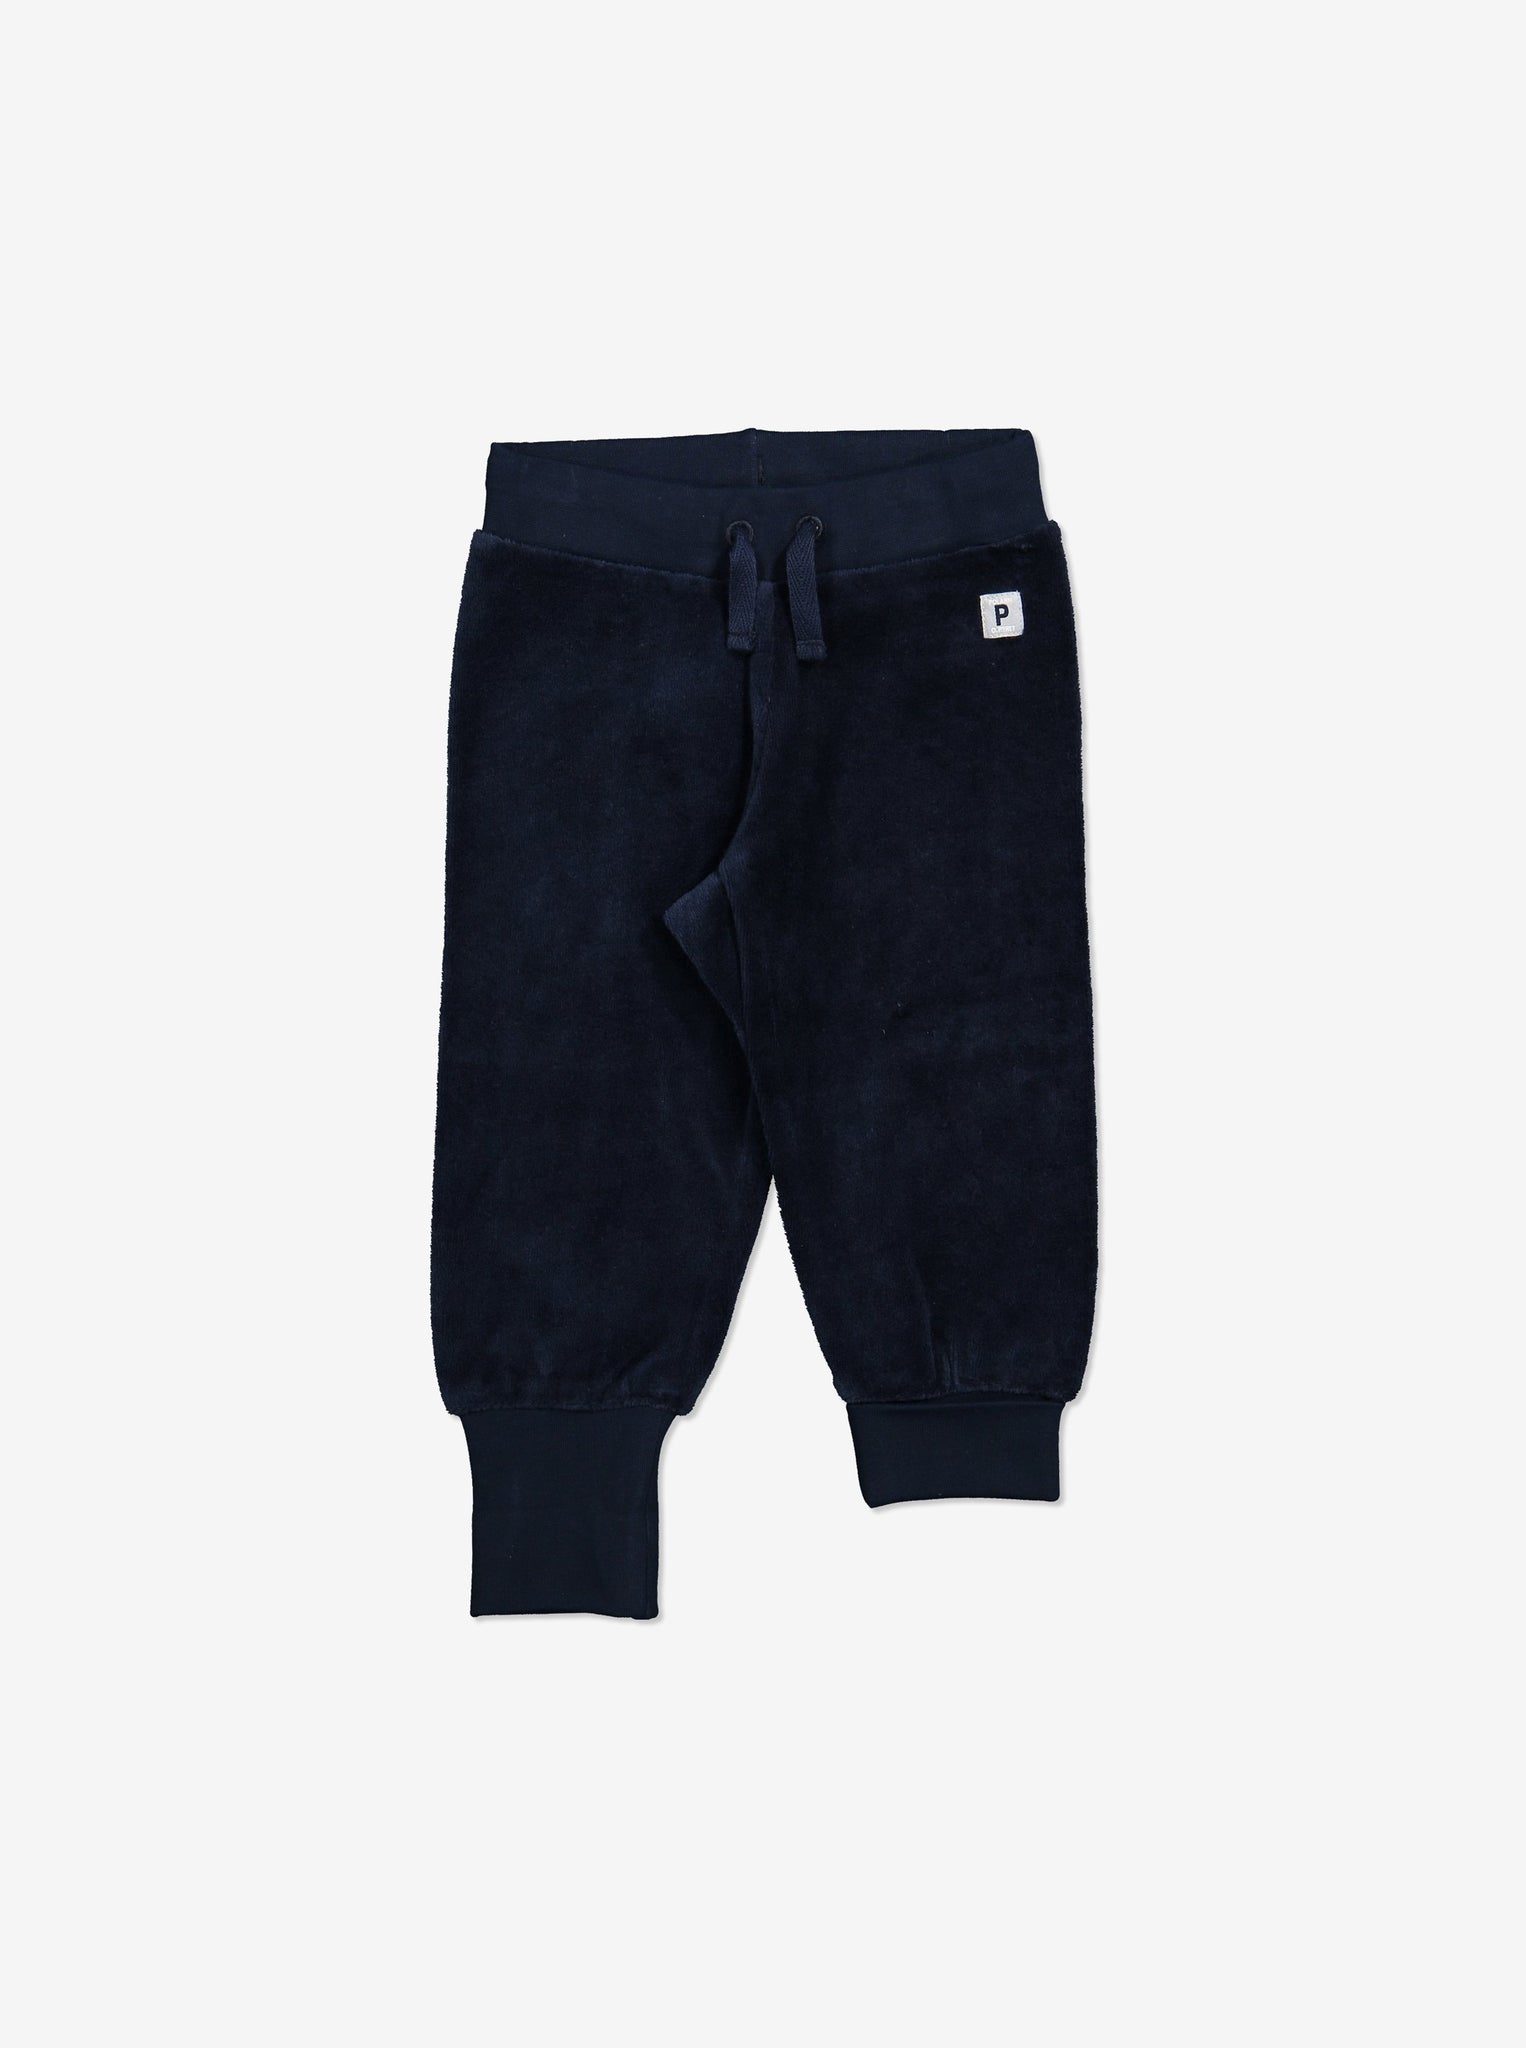 Navy Leggings For Girls, Kids Eco Clothes